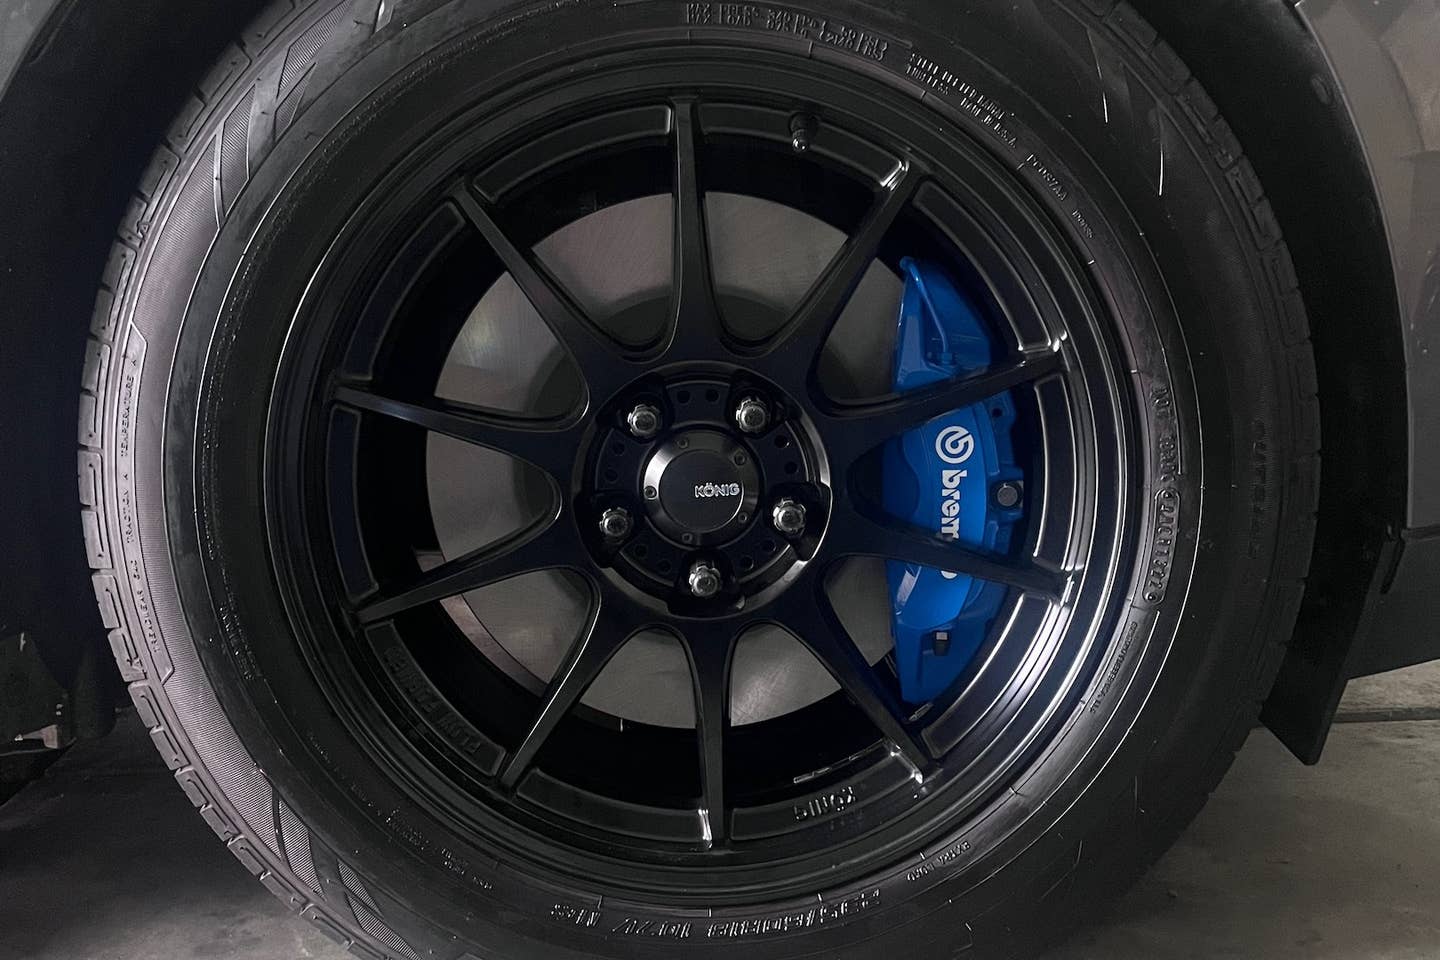 Ford Focus RS Brembo brakes on a Maverick